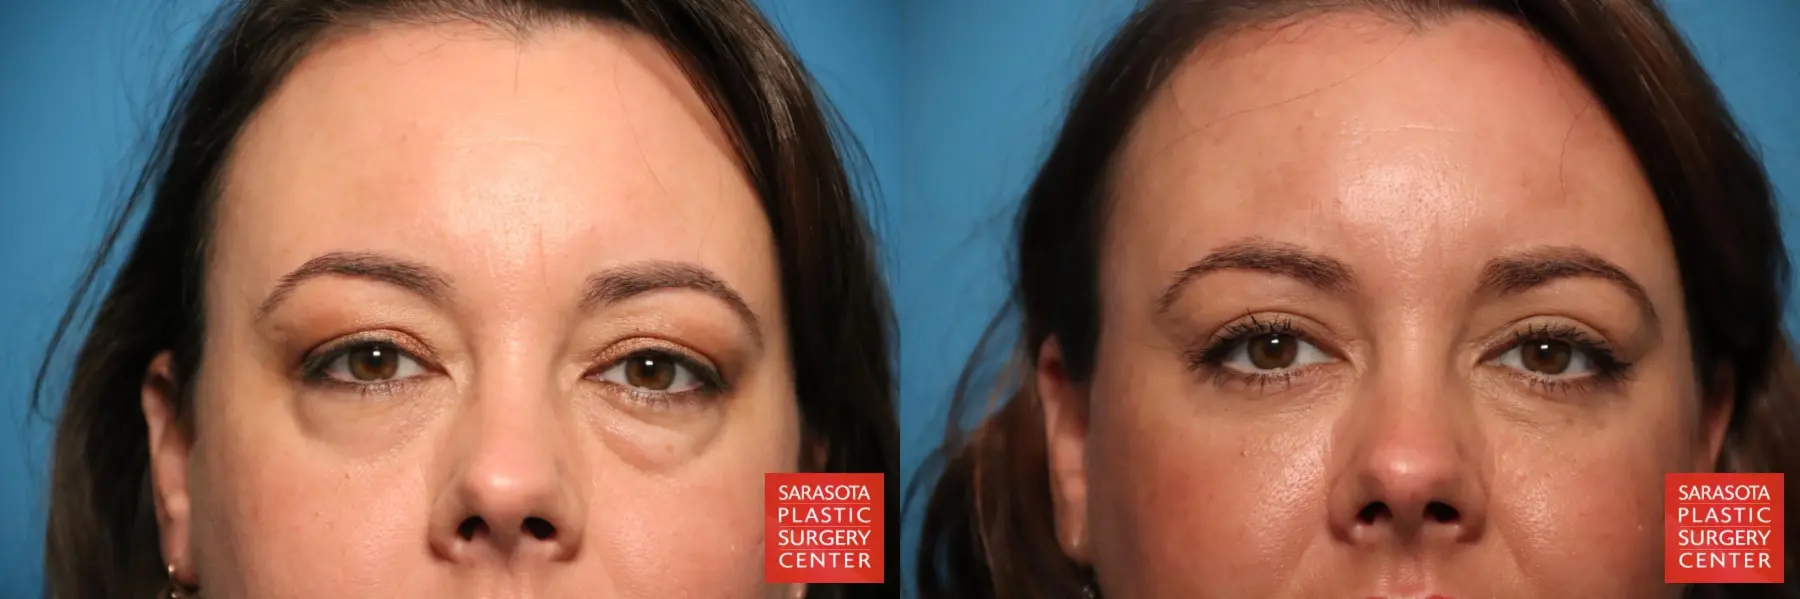 Eyelid Lift: Patient 60 - Before and After 1